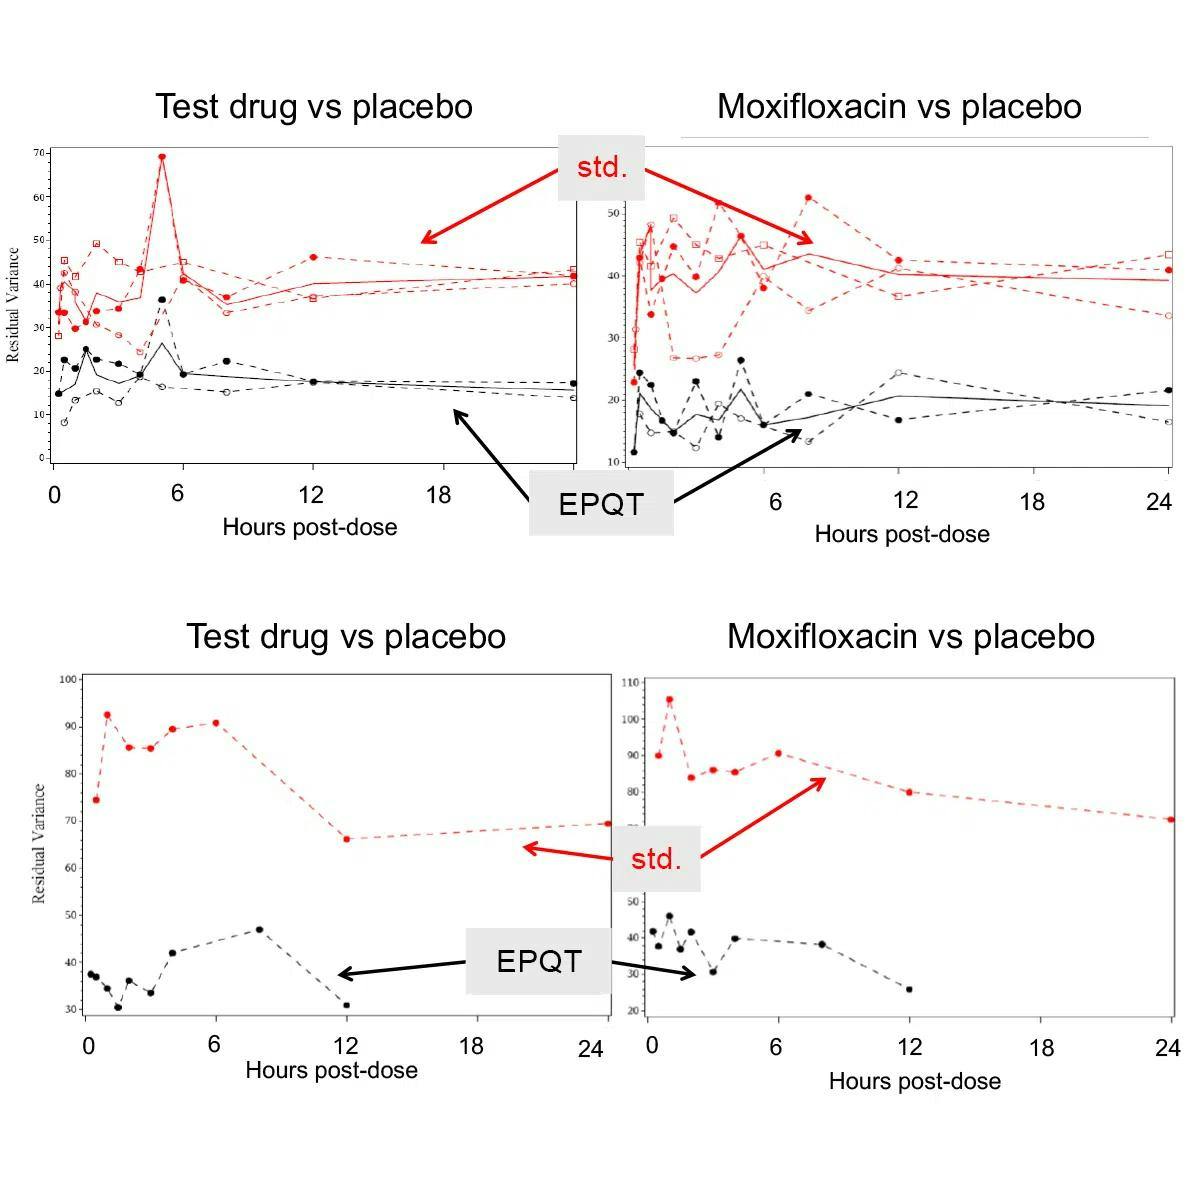 The variance across post-dosing time points from seven TQT studies. Regardless of study design (cross-over in upper panels or parallel in lower panels) or comparison (active vs. placebo in right panels, moxifloxacin vs. placebo in left), EPQT halved the variance, i.e., was substantially more precise.

Figure 1 in Meiser K, et al. Comparing QT interval variability of semiautomated and high-precision ECG methodologies in seven thorough QT studies — implications for the power of studies intended for definitive evaluation of a drug’s QT effect.2